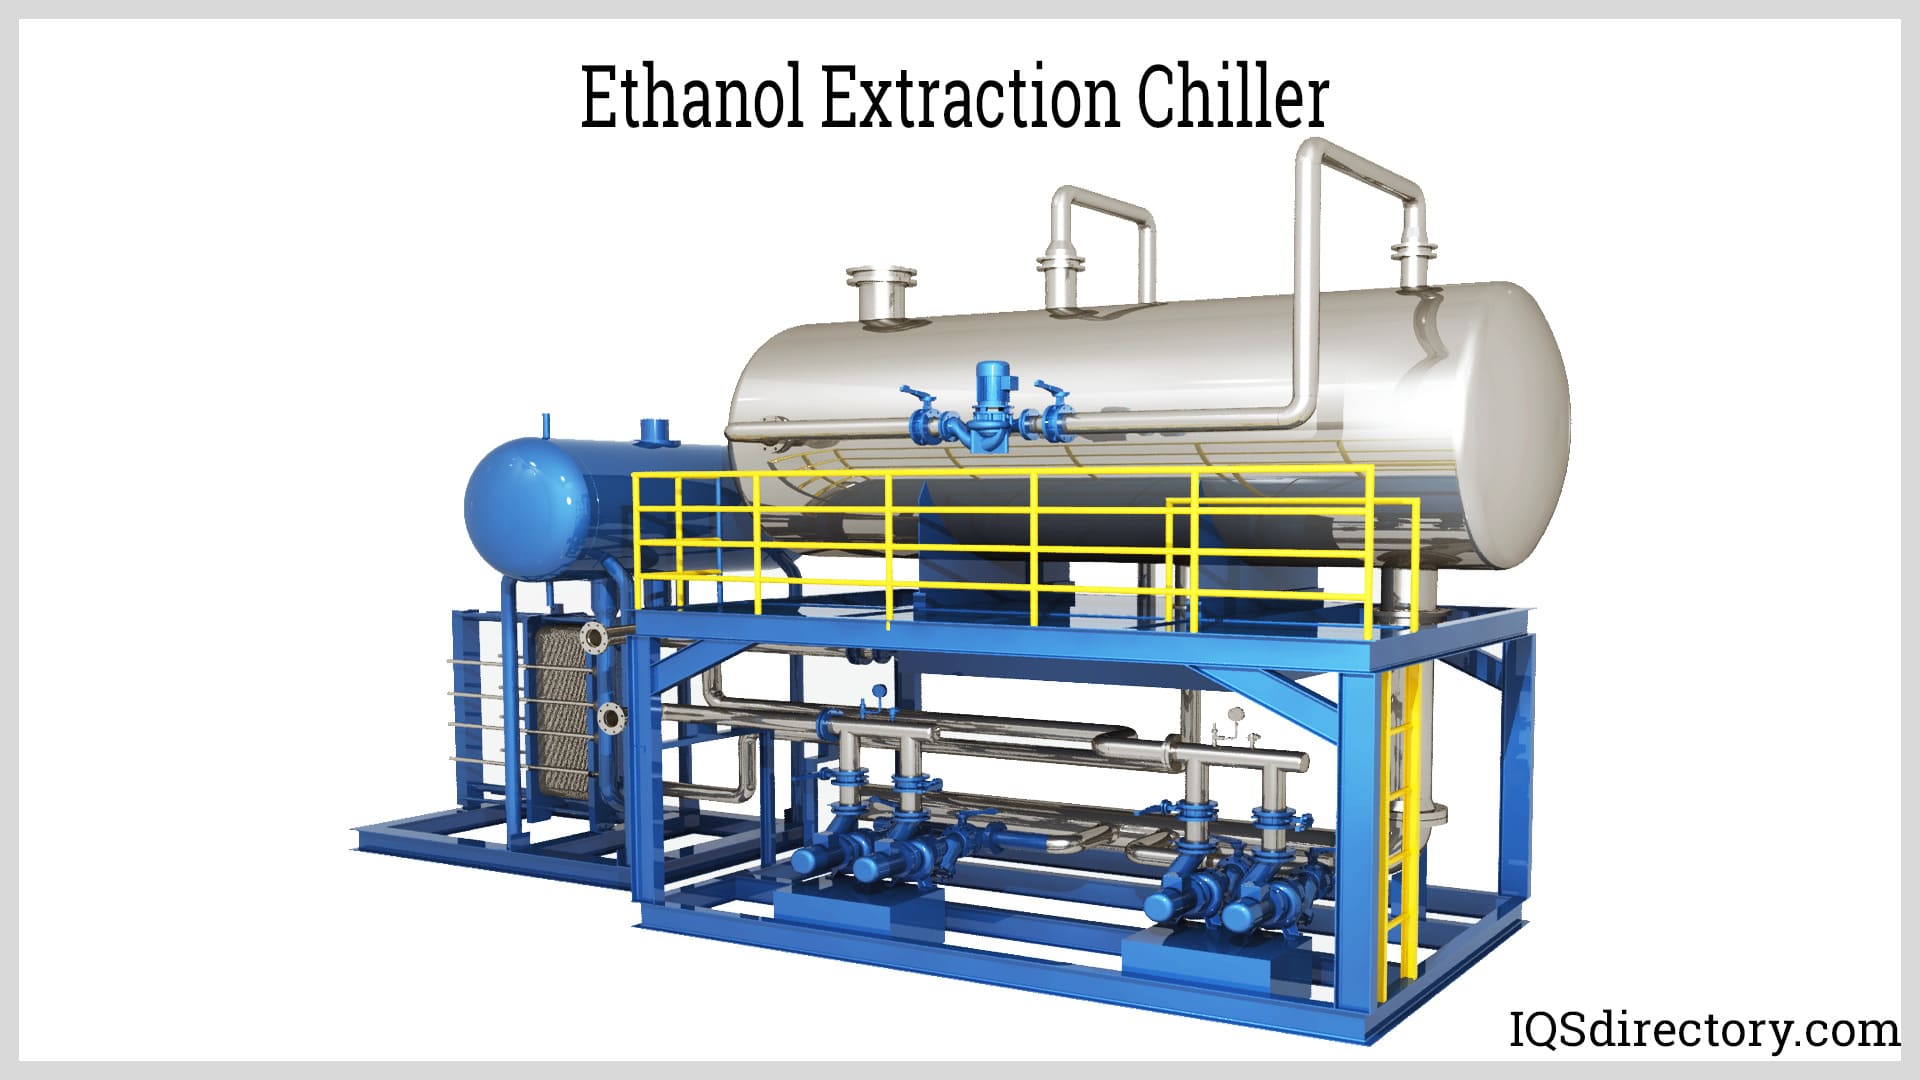 Ethanol Extraction Chiller